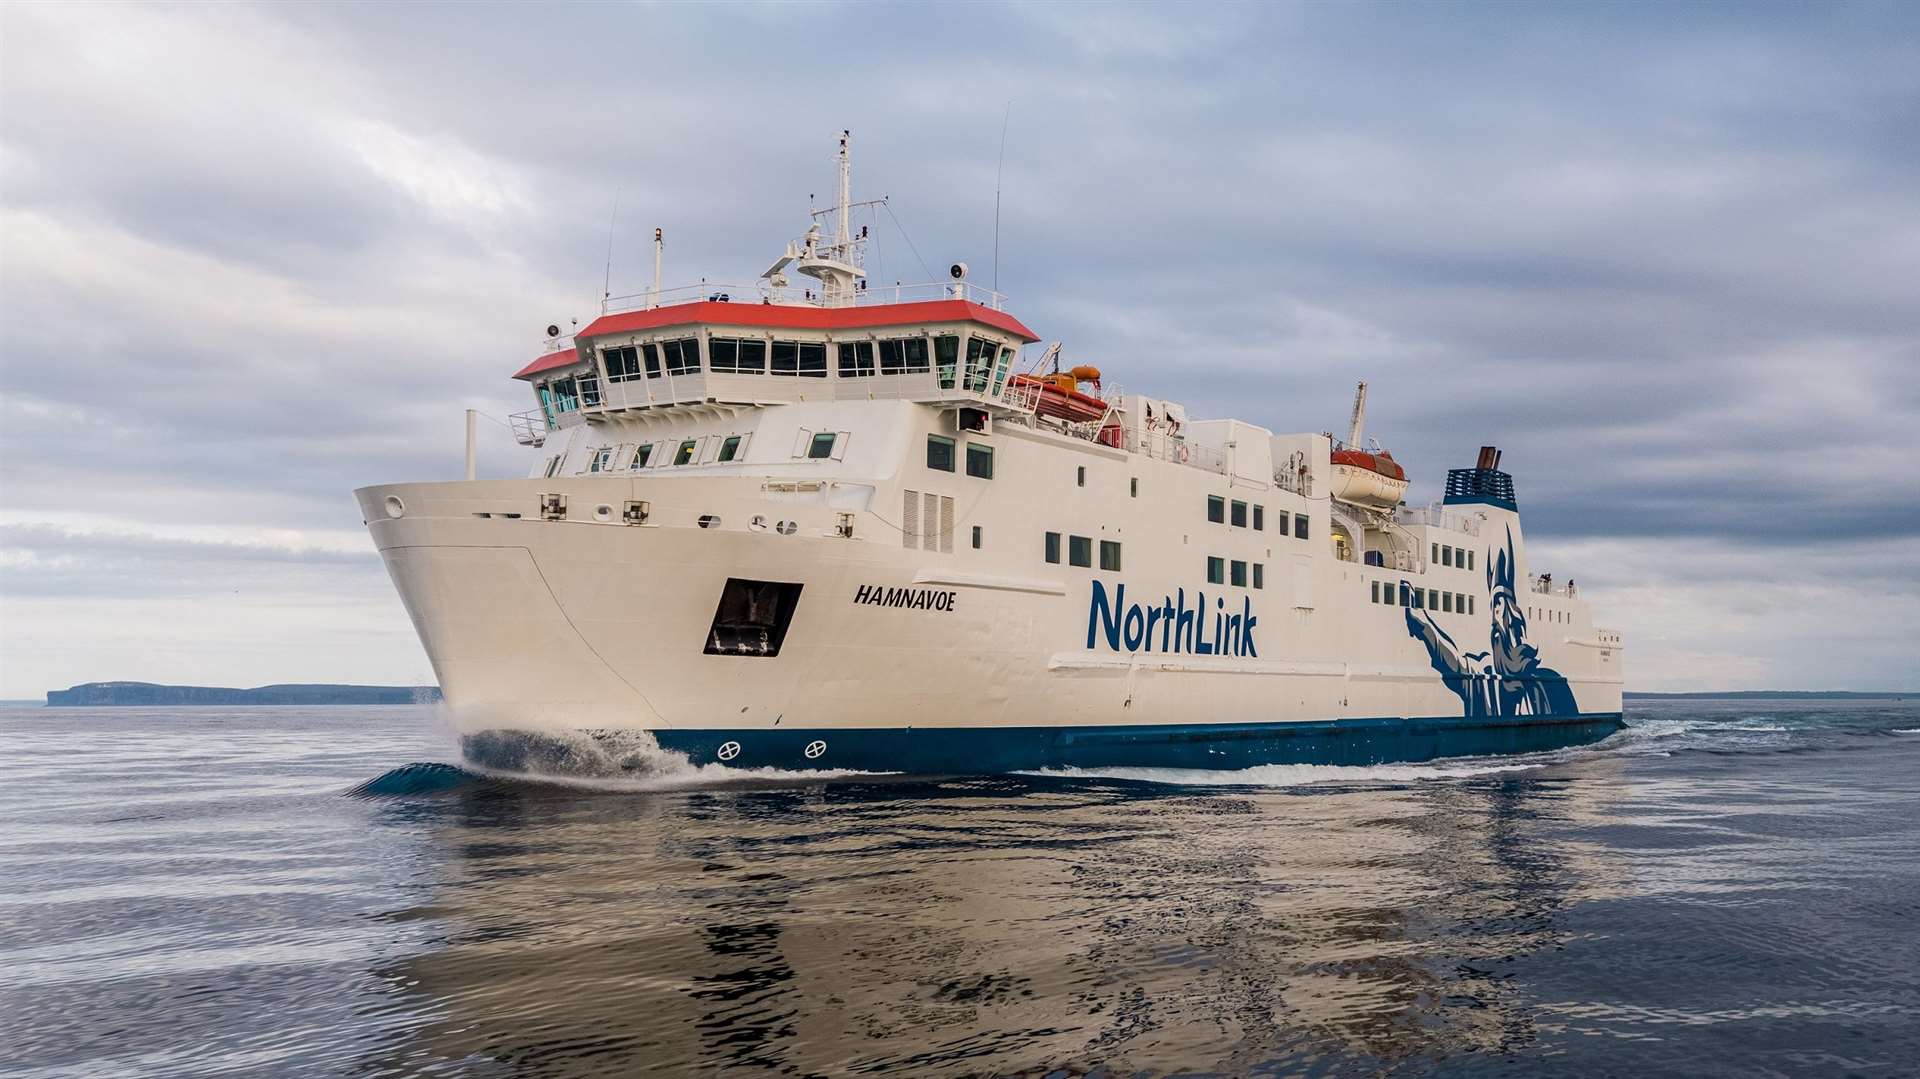 NorthLink's Hamnavoe ferry operates on the Scrabster to Stromness route. Picture: NorthLink Ferries